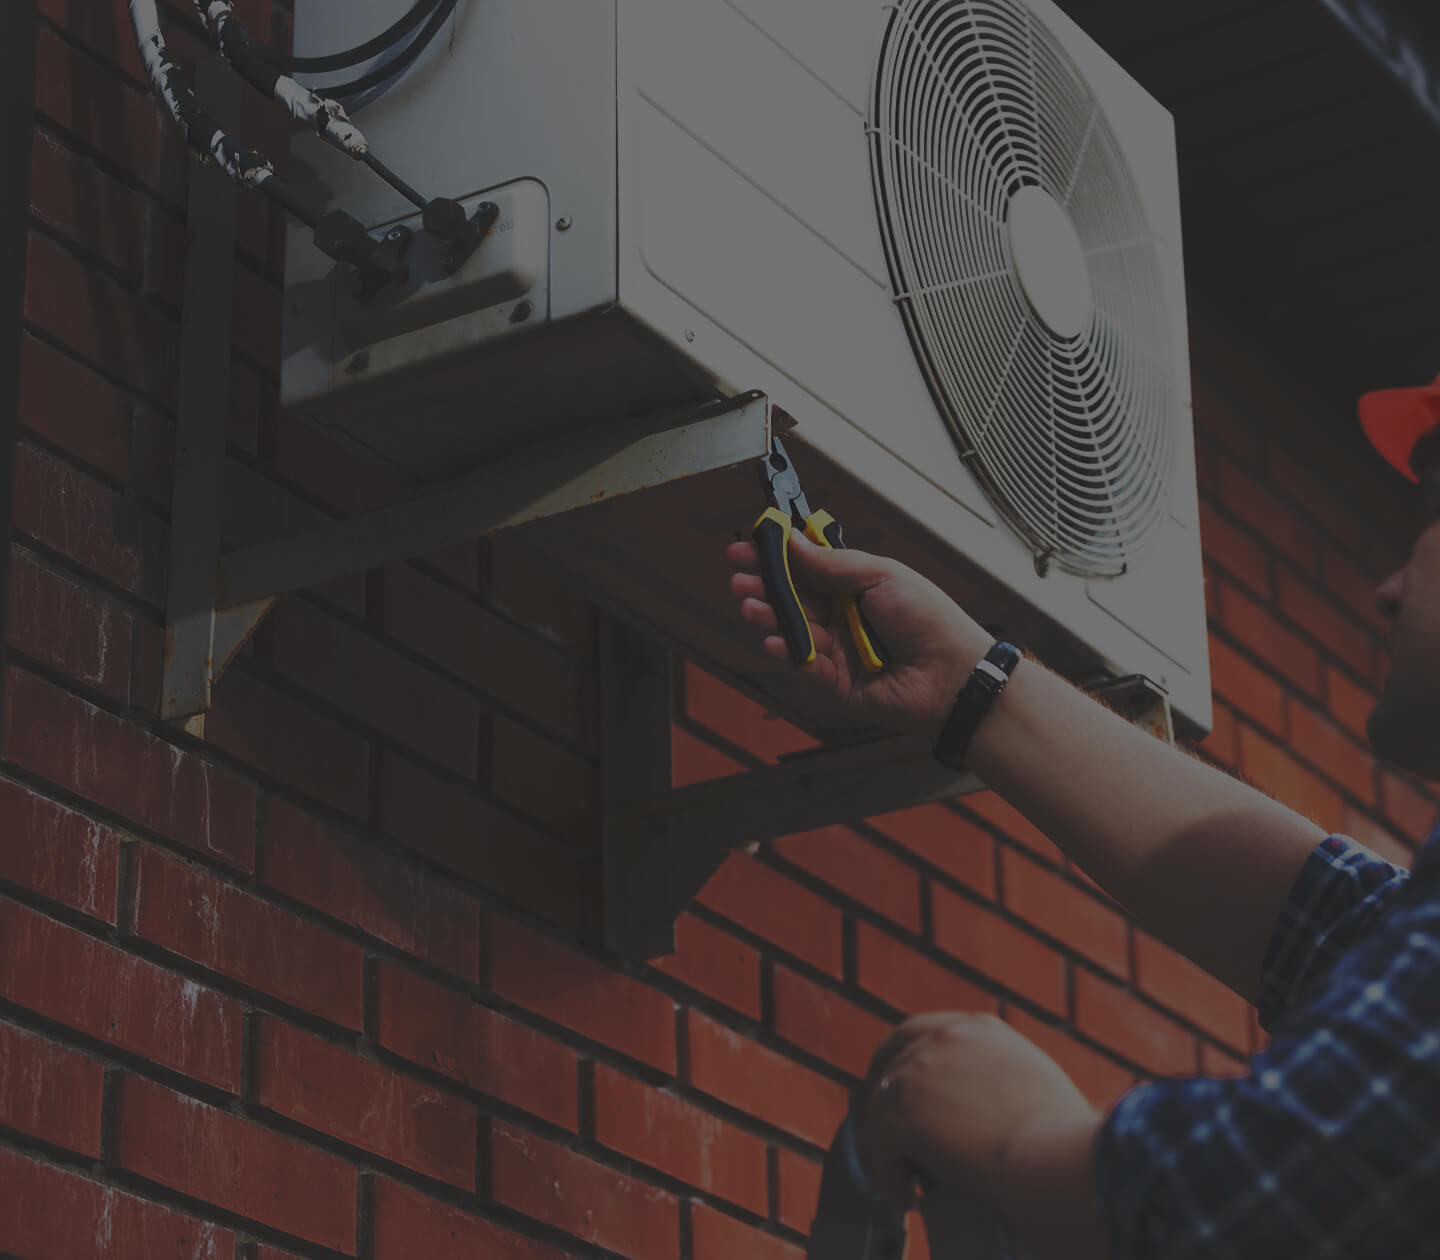 Outside AC Unit Not Working? Here’s How to Troubleshoot It